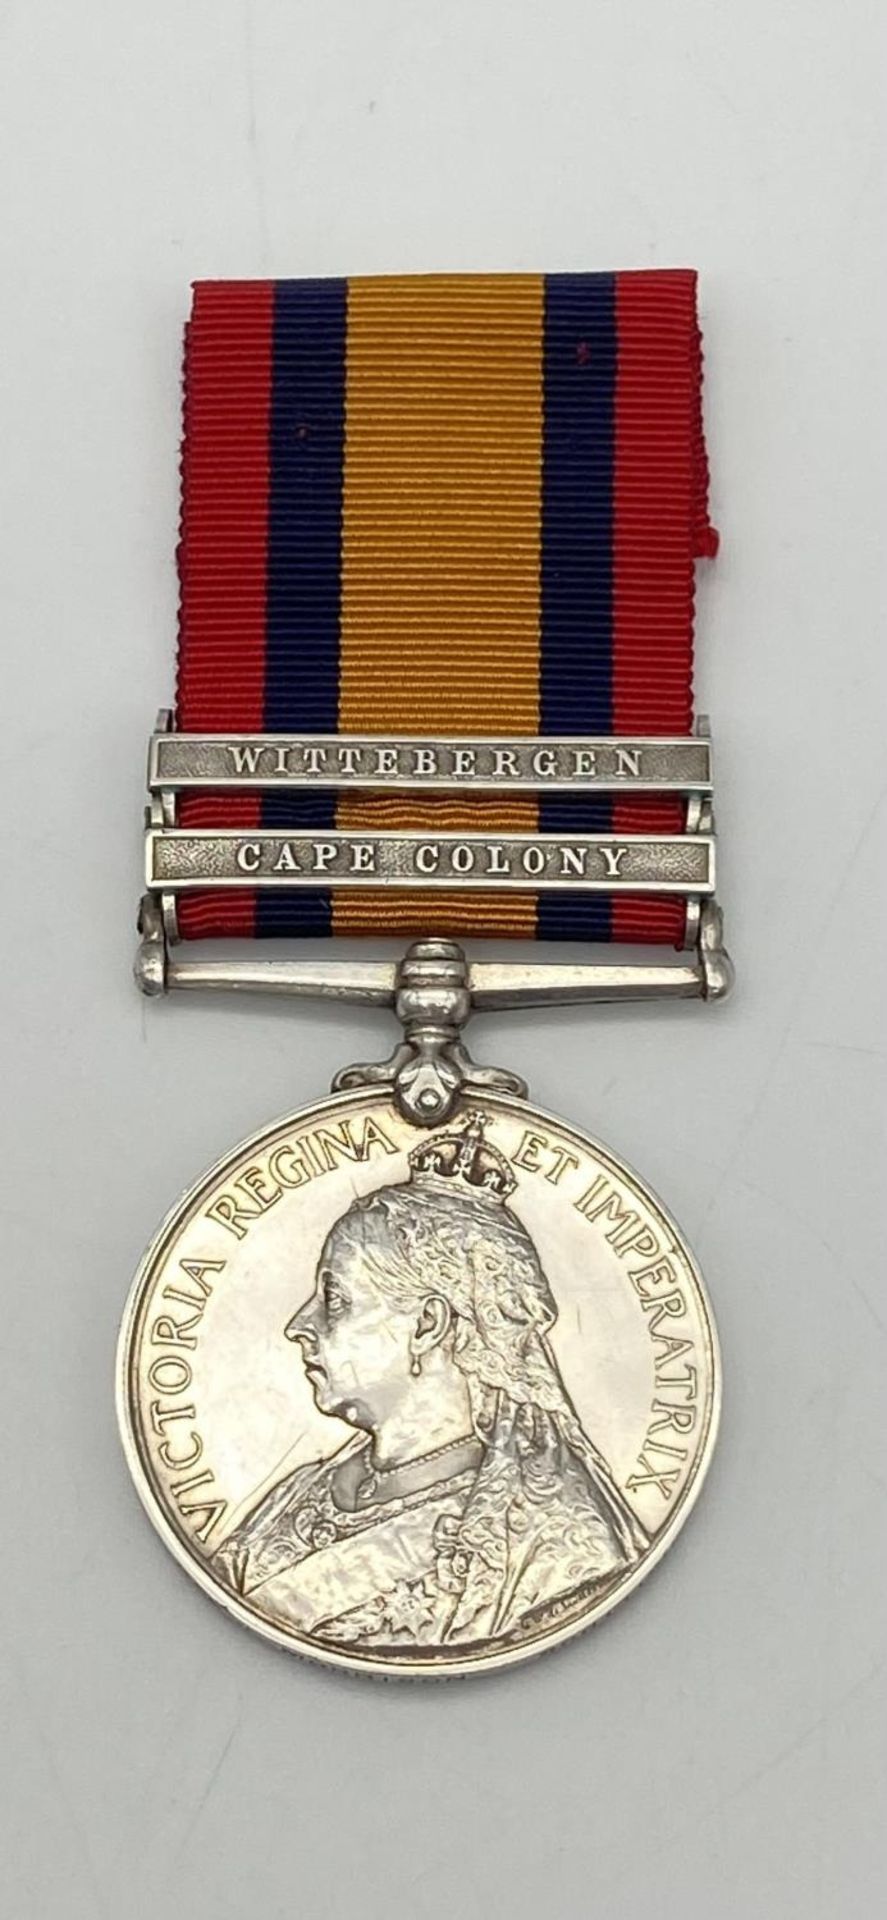 Queen’s South Africa Medal 1899-1902, with two clasps: Cape Colony, Wittebergen. Named to : 2094 Cpl